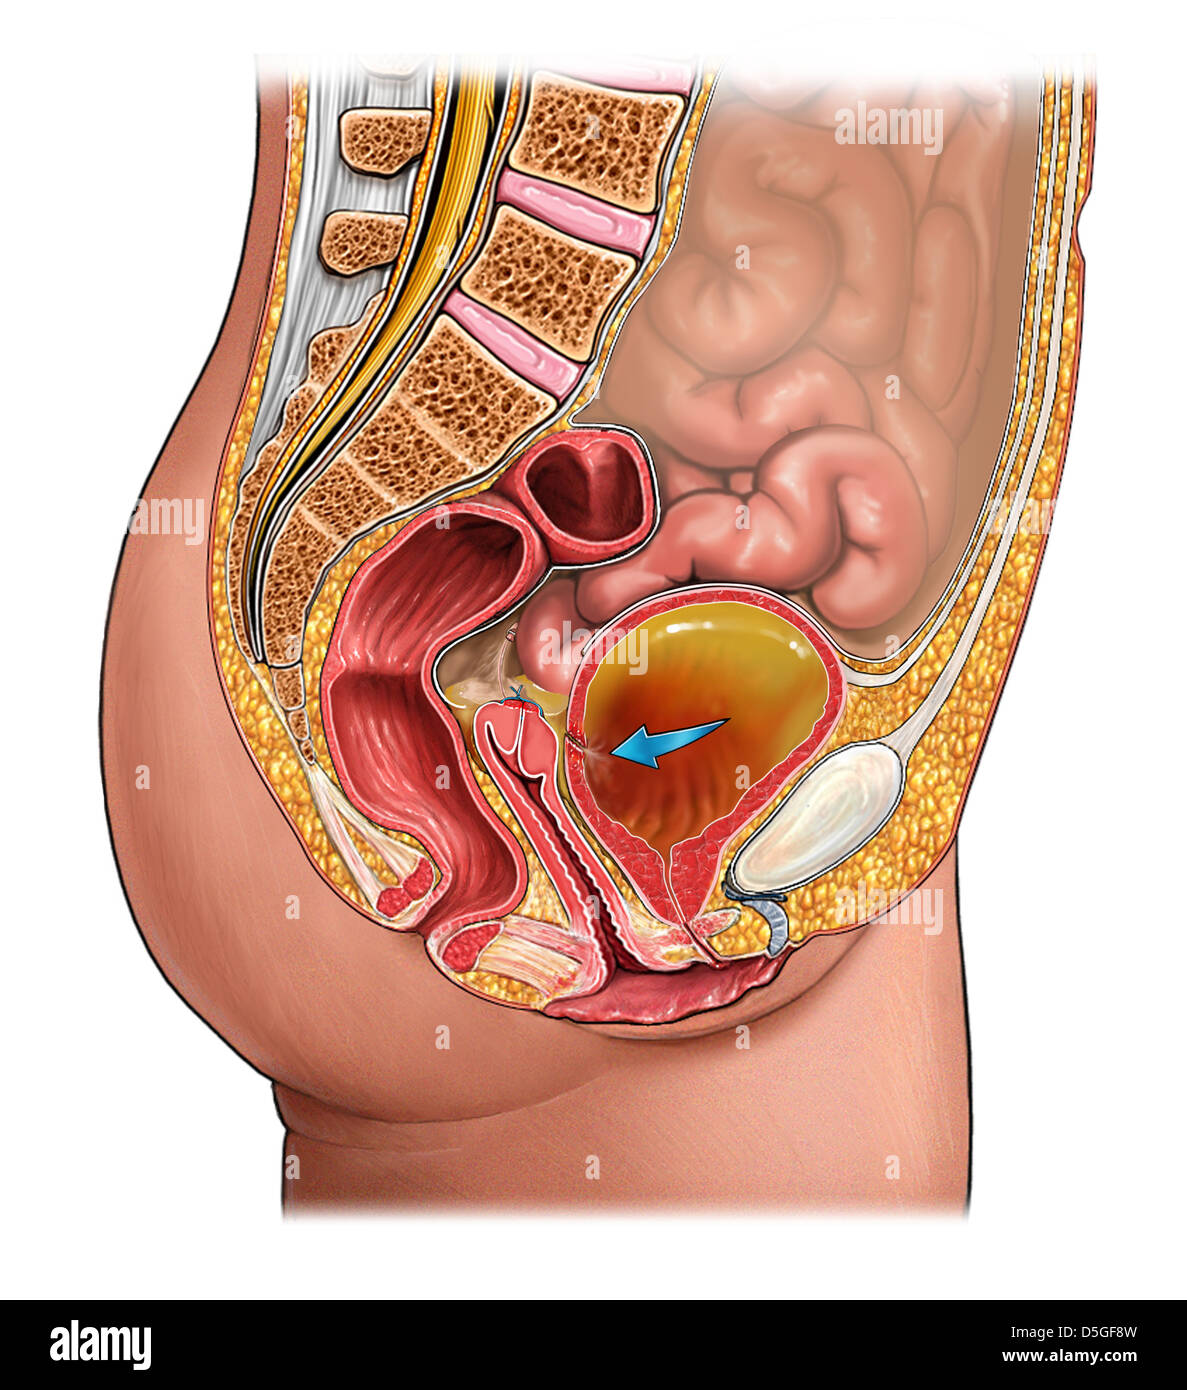 Hysterectomy and Perforation of Urinary Bladder Stock Photo